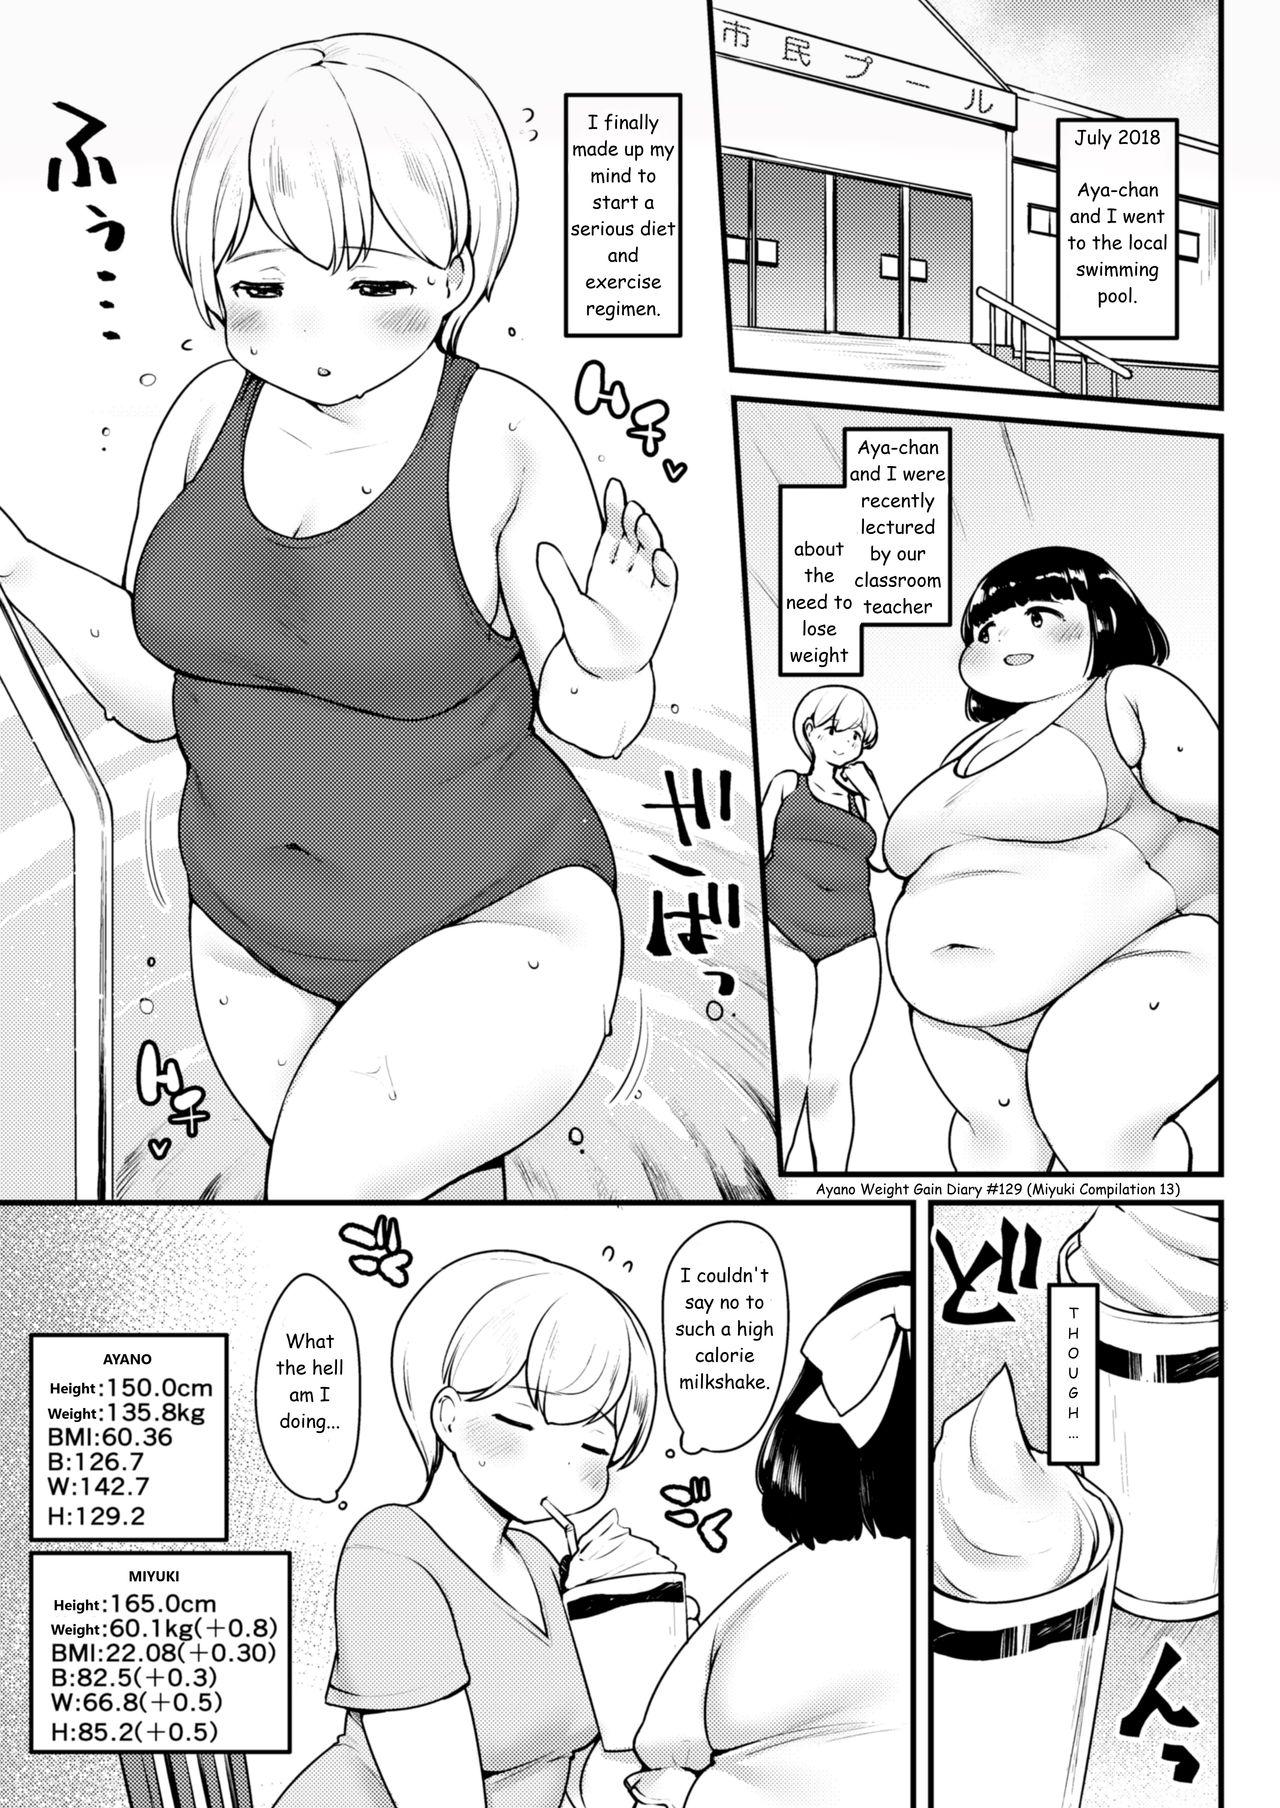 Ayano's Weight Gain Diary [English] Torrent(181 pages) 128